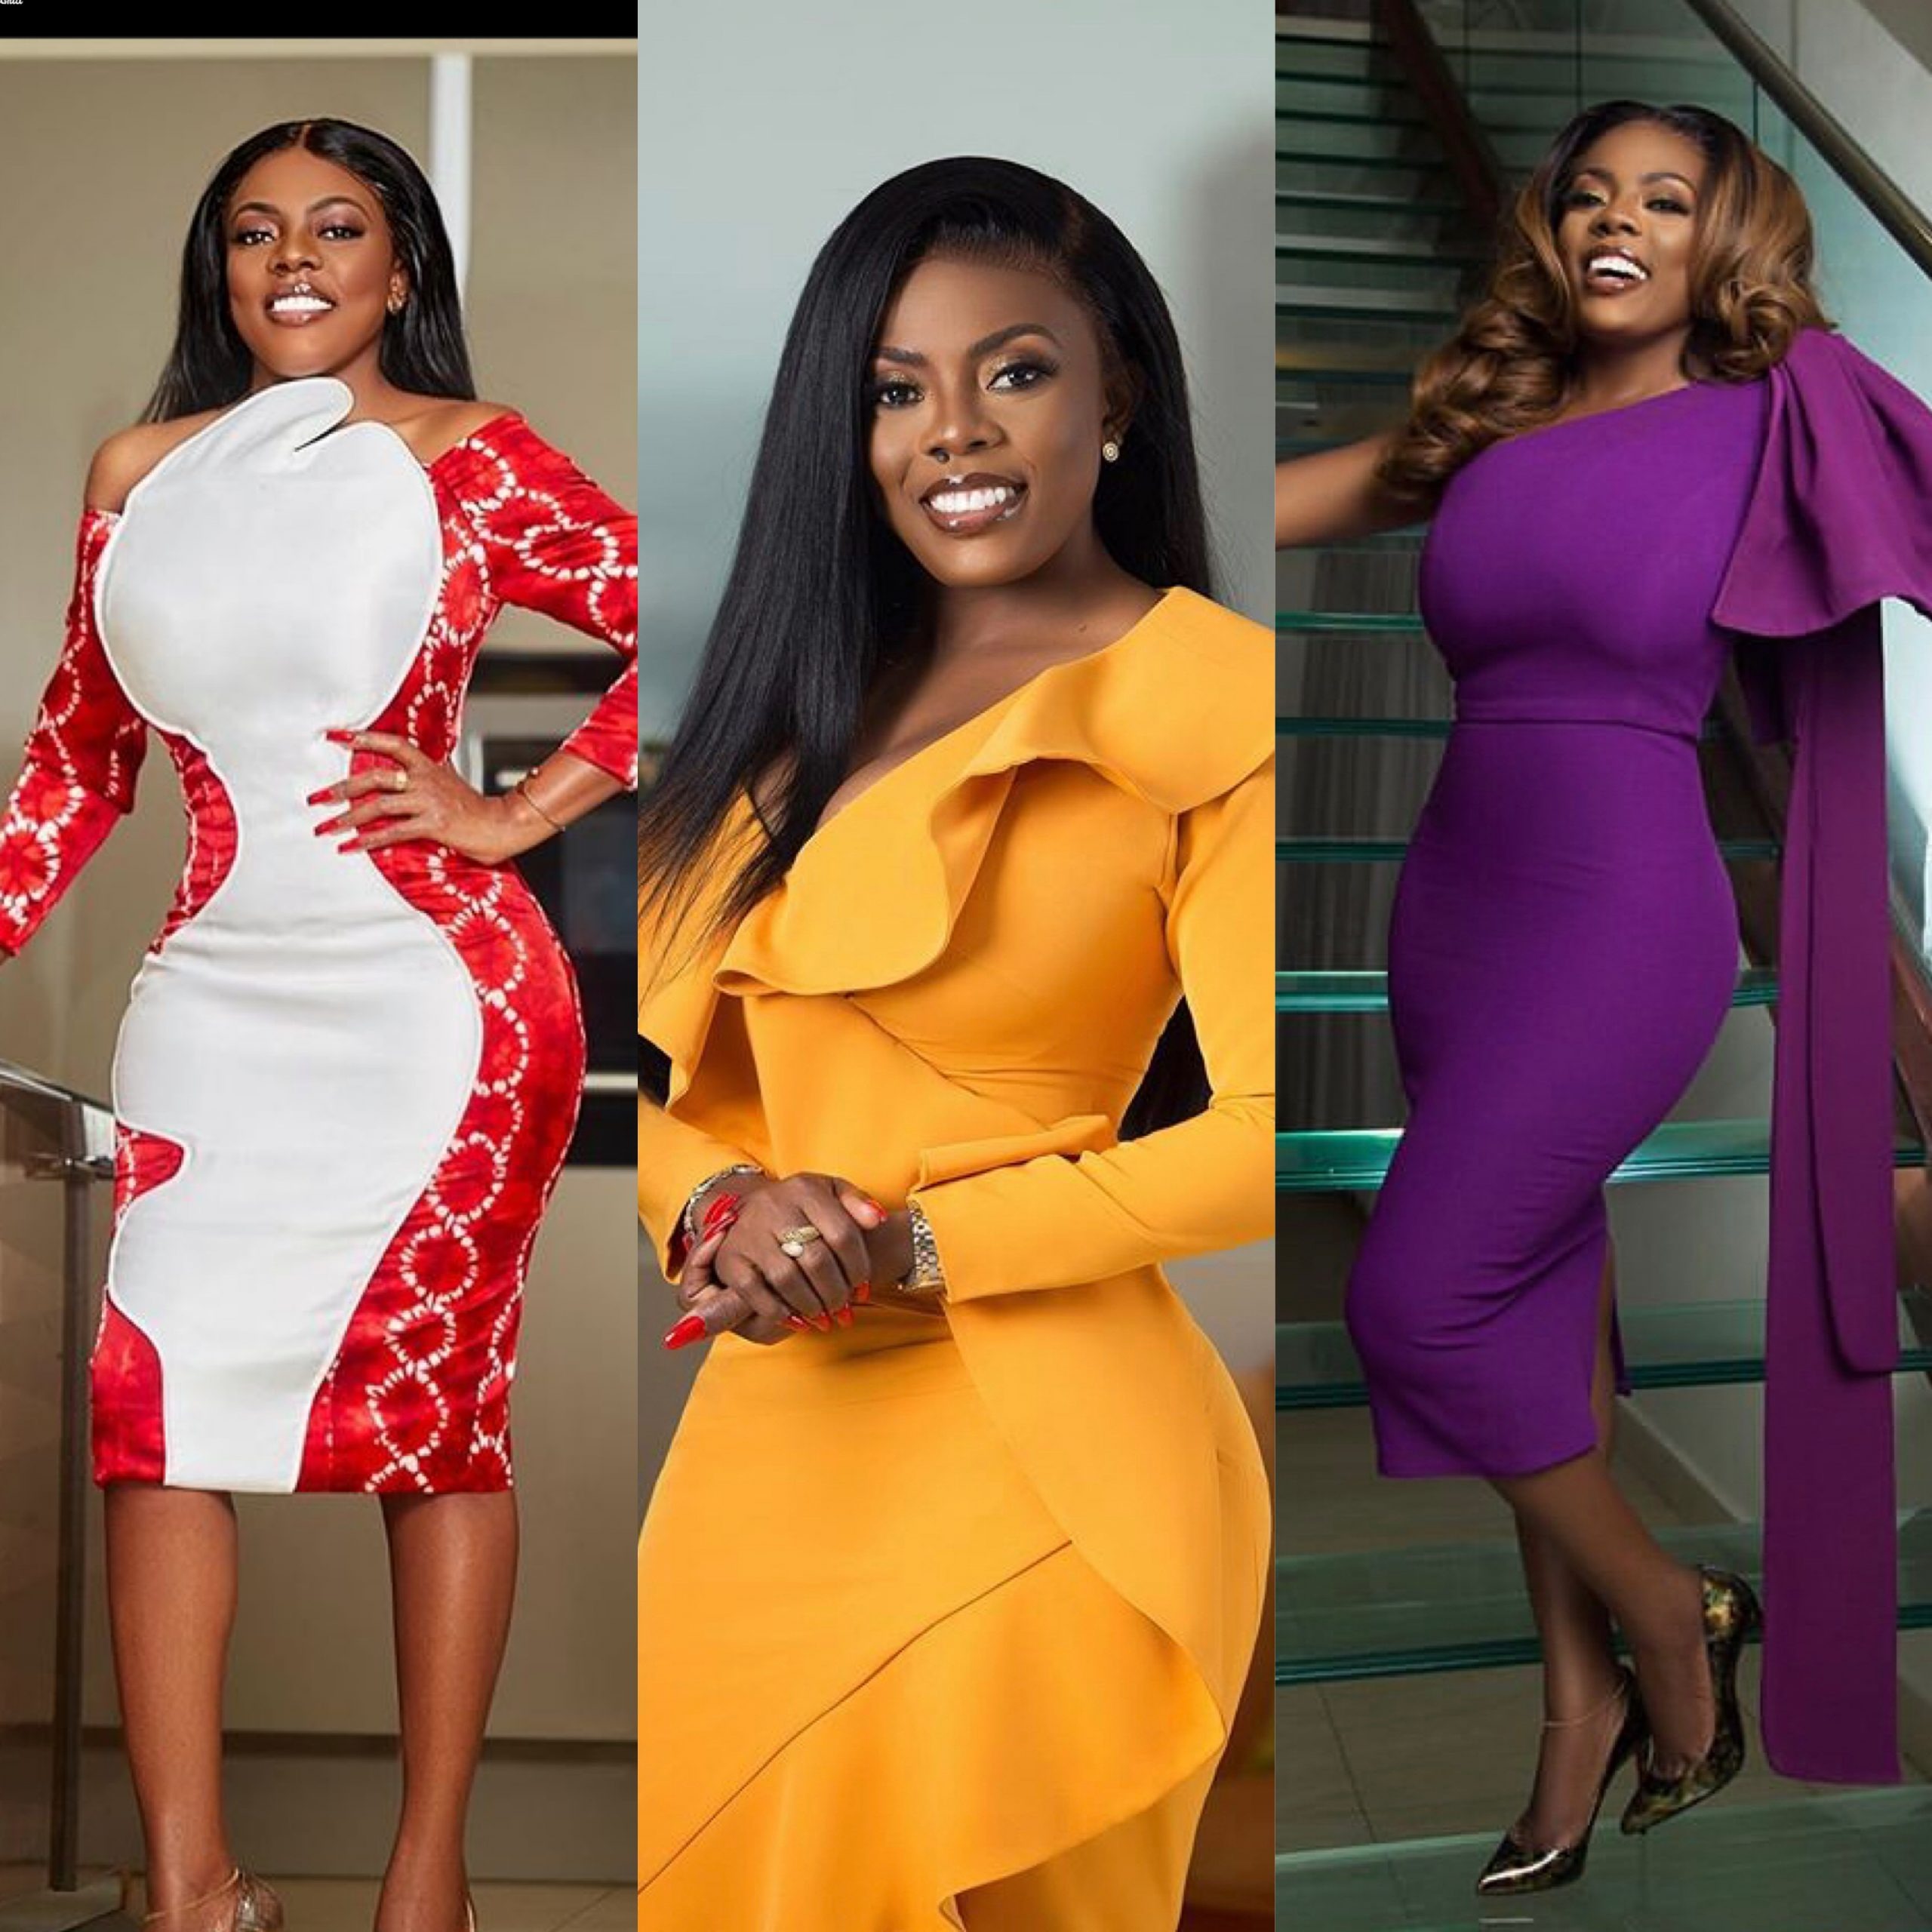 Nana Aba looking classy in stylish outfit